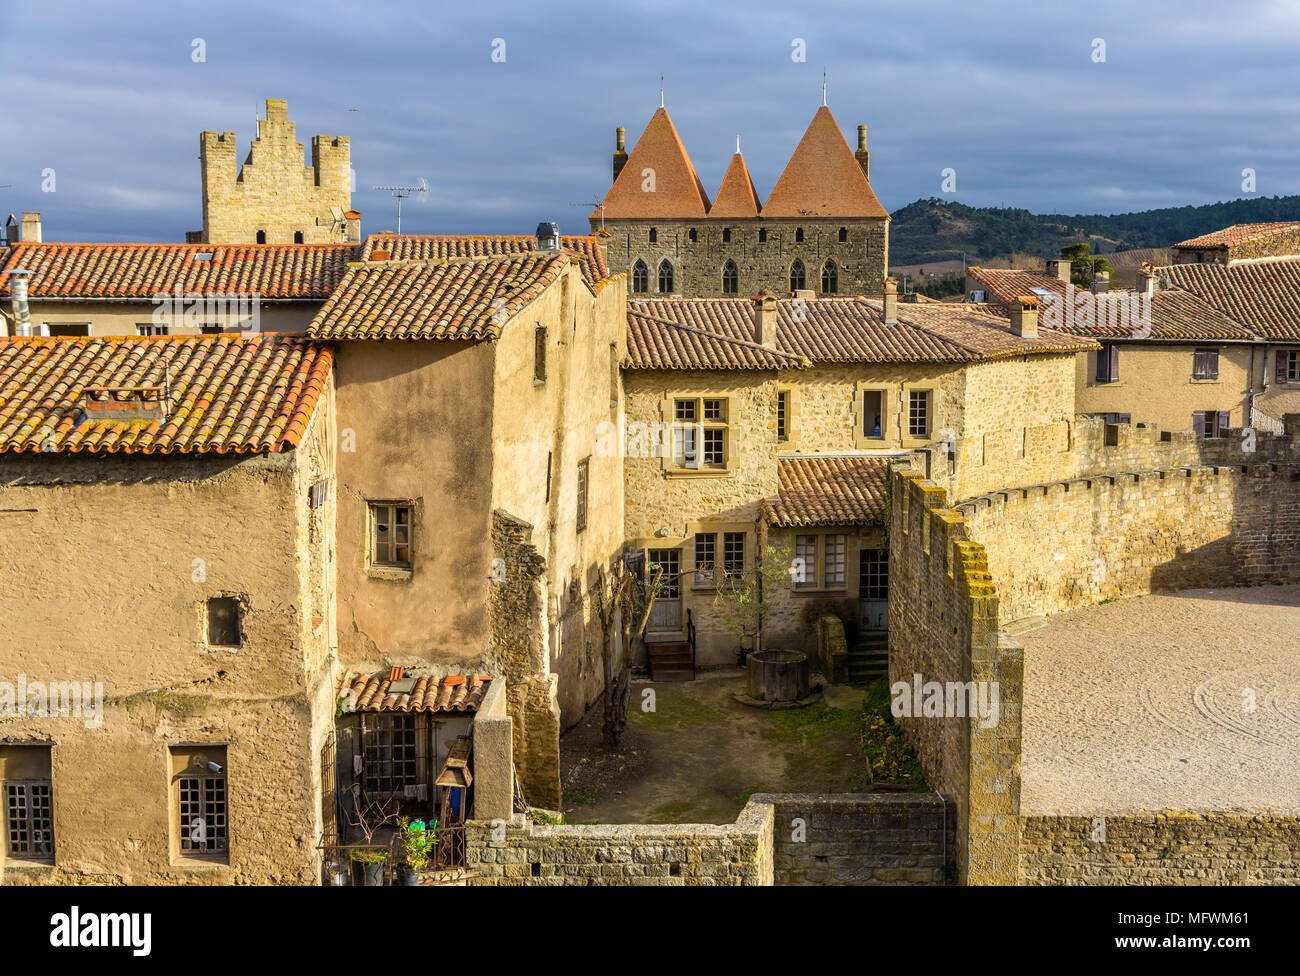 Inside the fortified city of Carcassonne - France Stock Photo